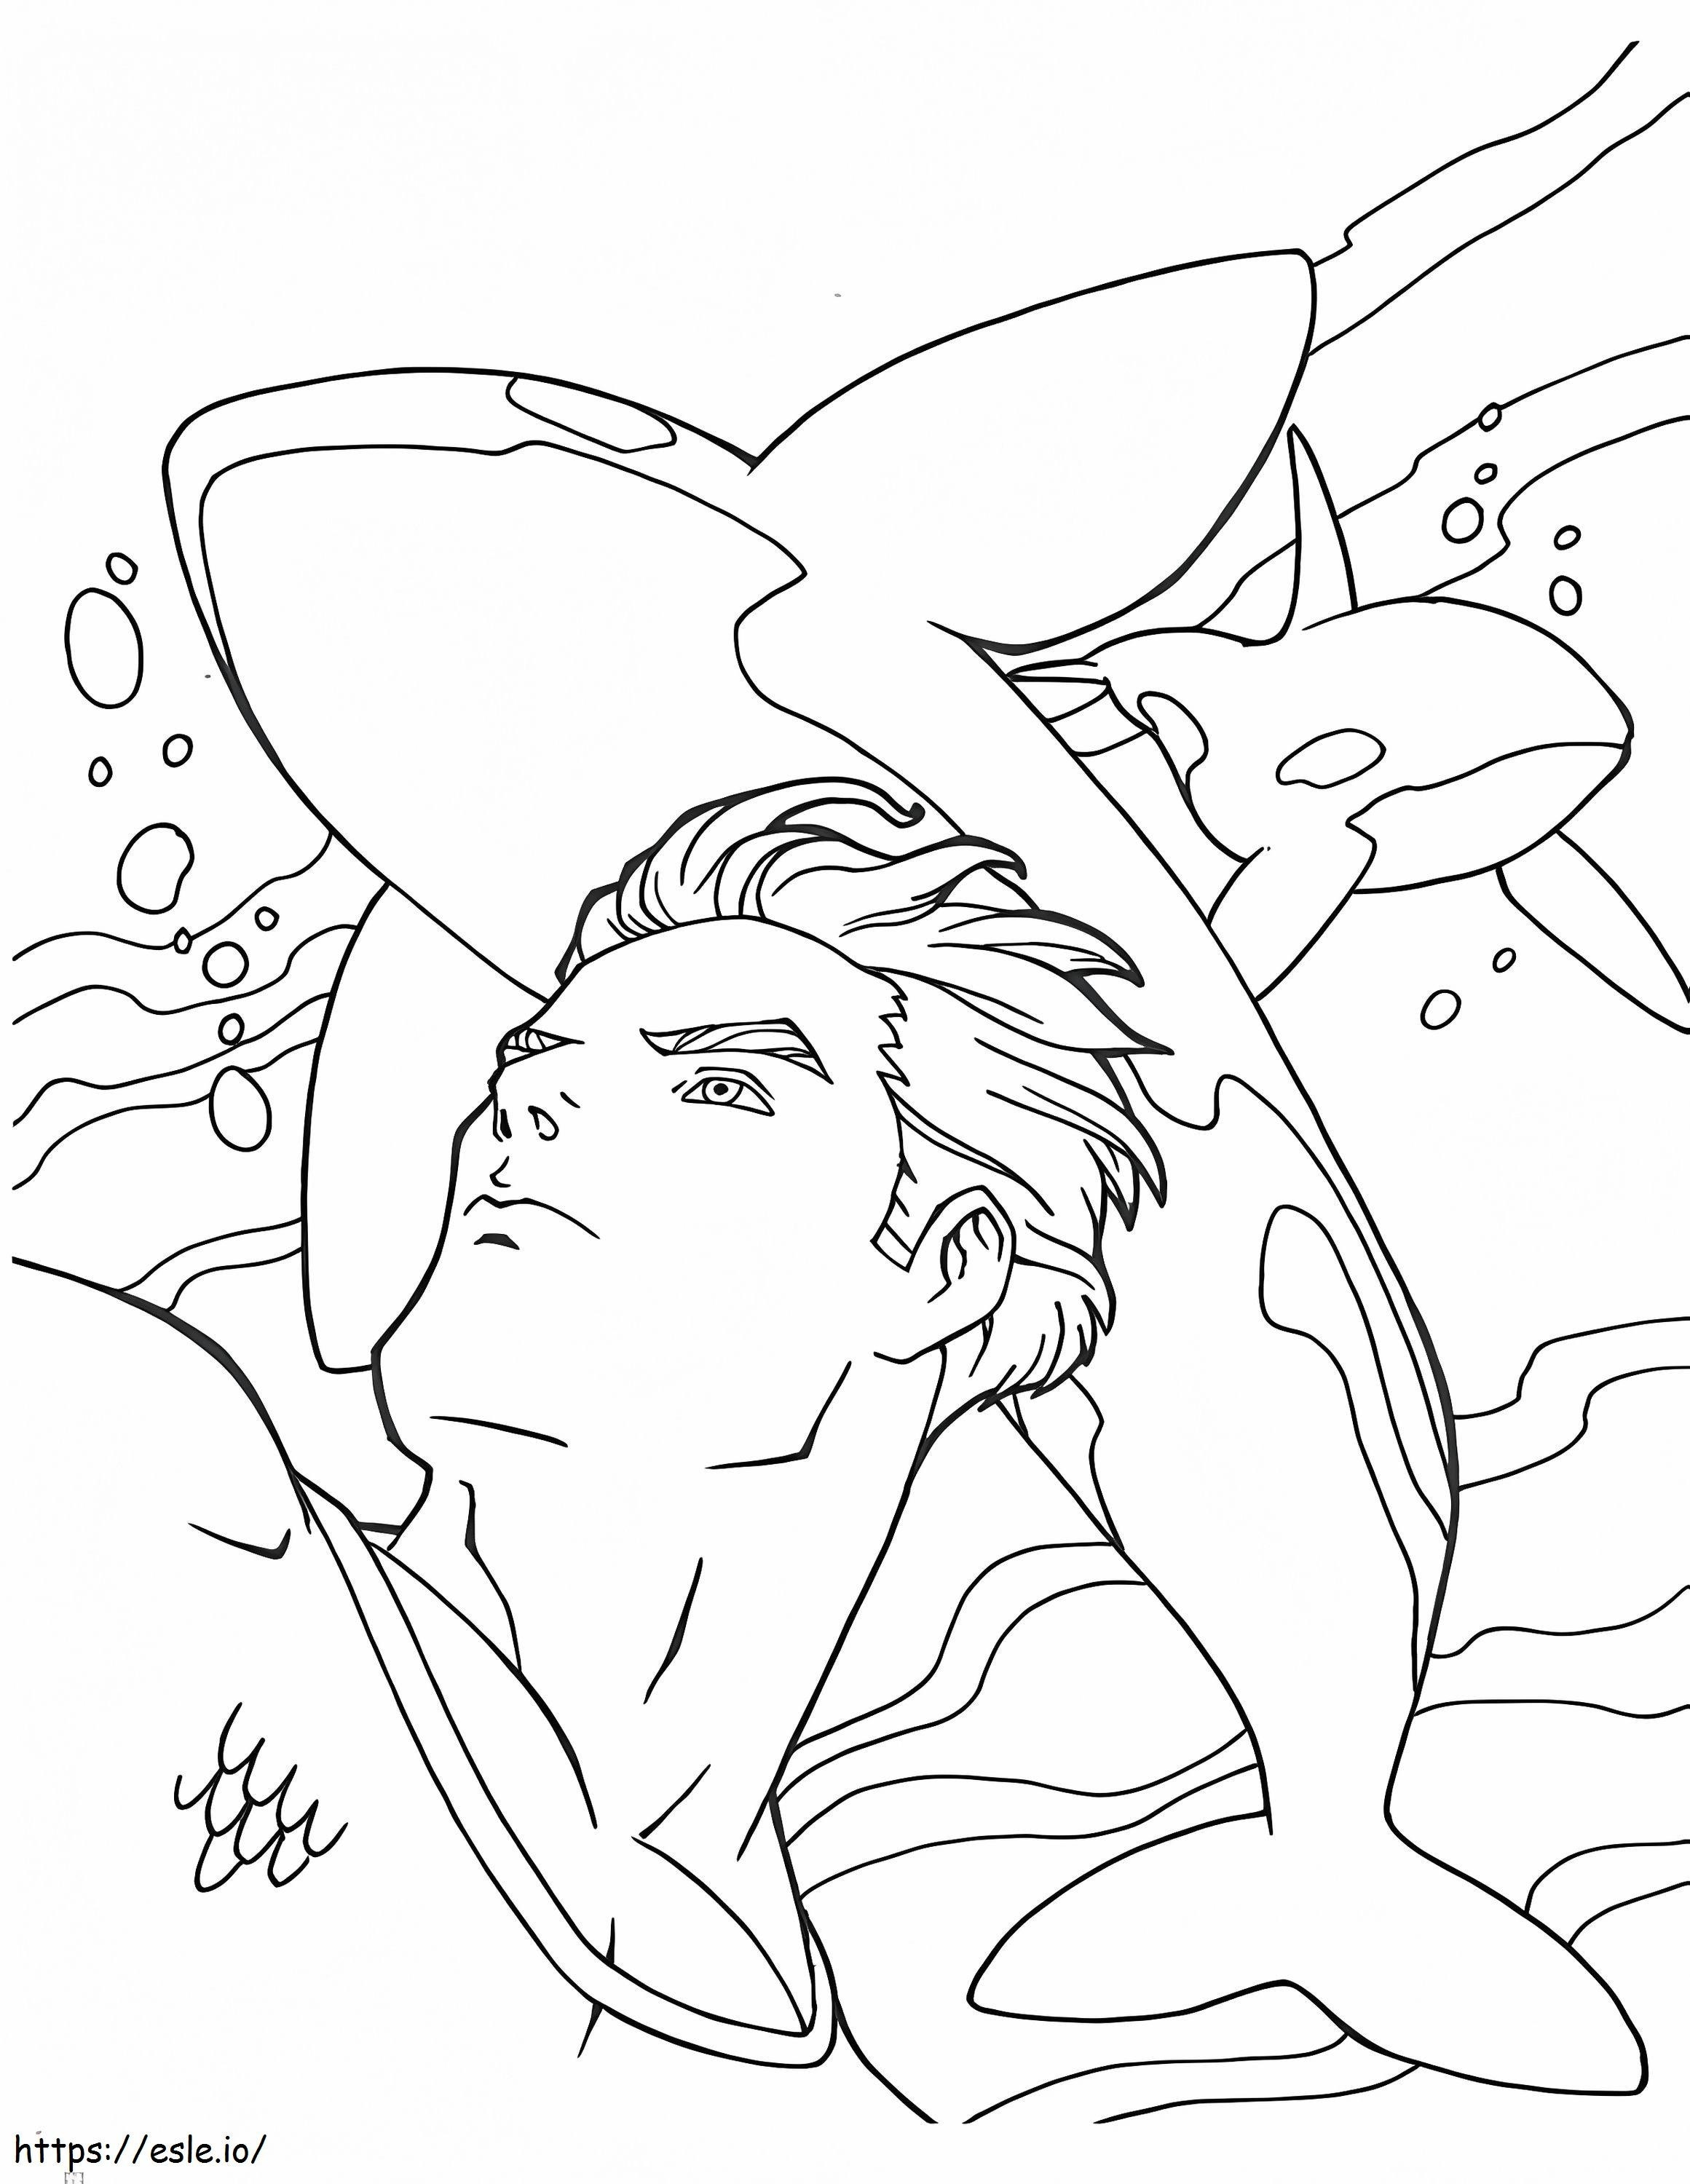 Aquaman And Killer Whales coloring page